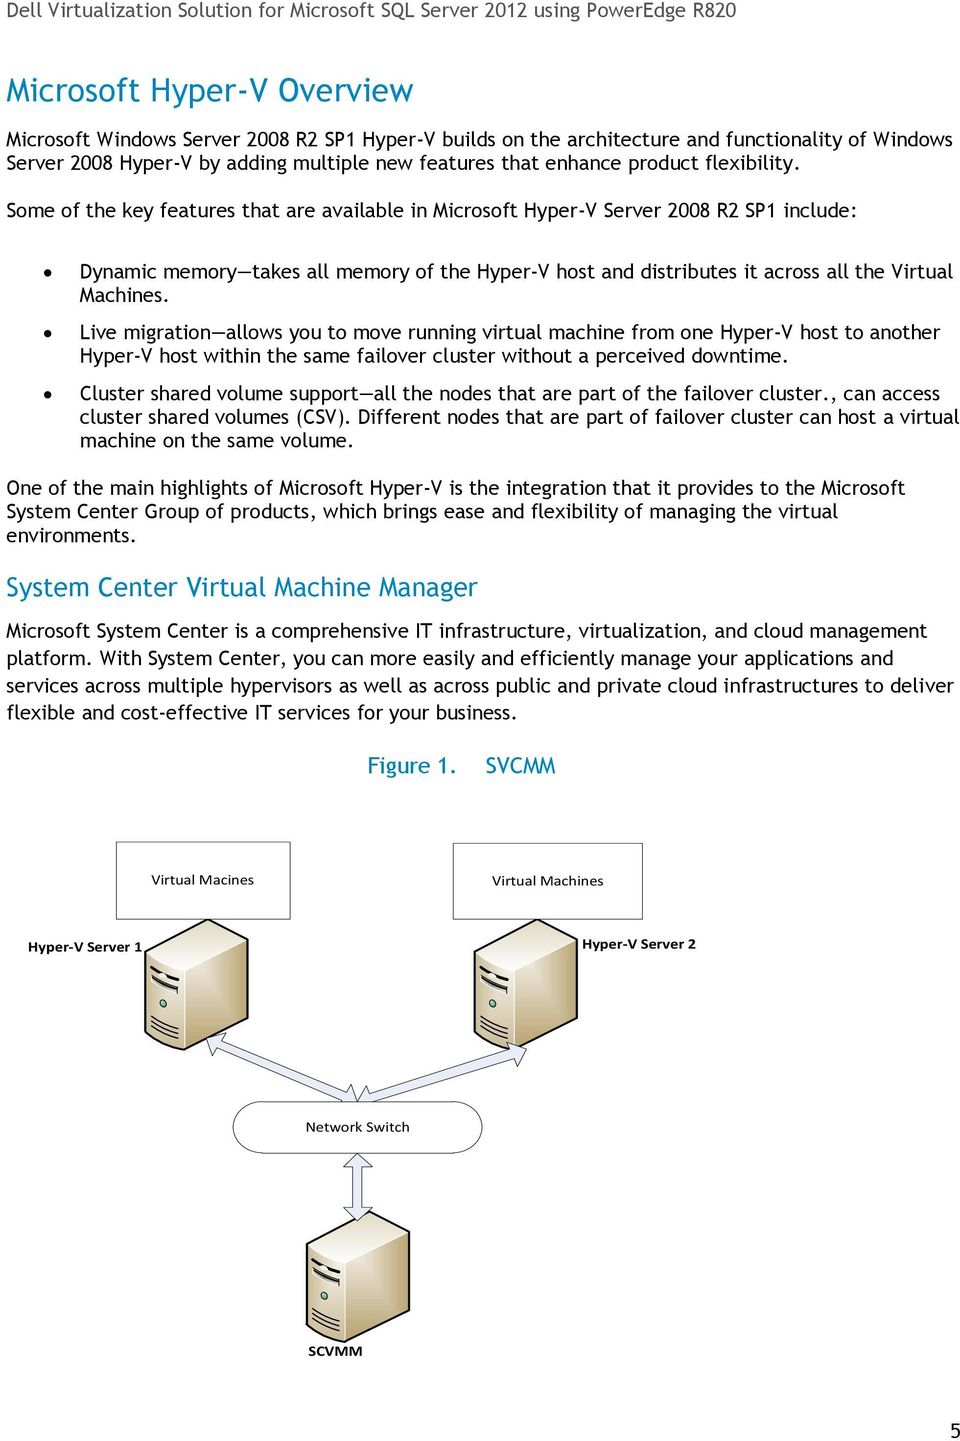 Some of the key features that are available in Microsoft Hyper-V Server 2008 R2 SP1 include: Dynamic memory takes all memory of the Hyper-V host and distributes it across all the Virtual Machines.